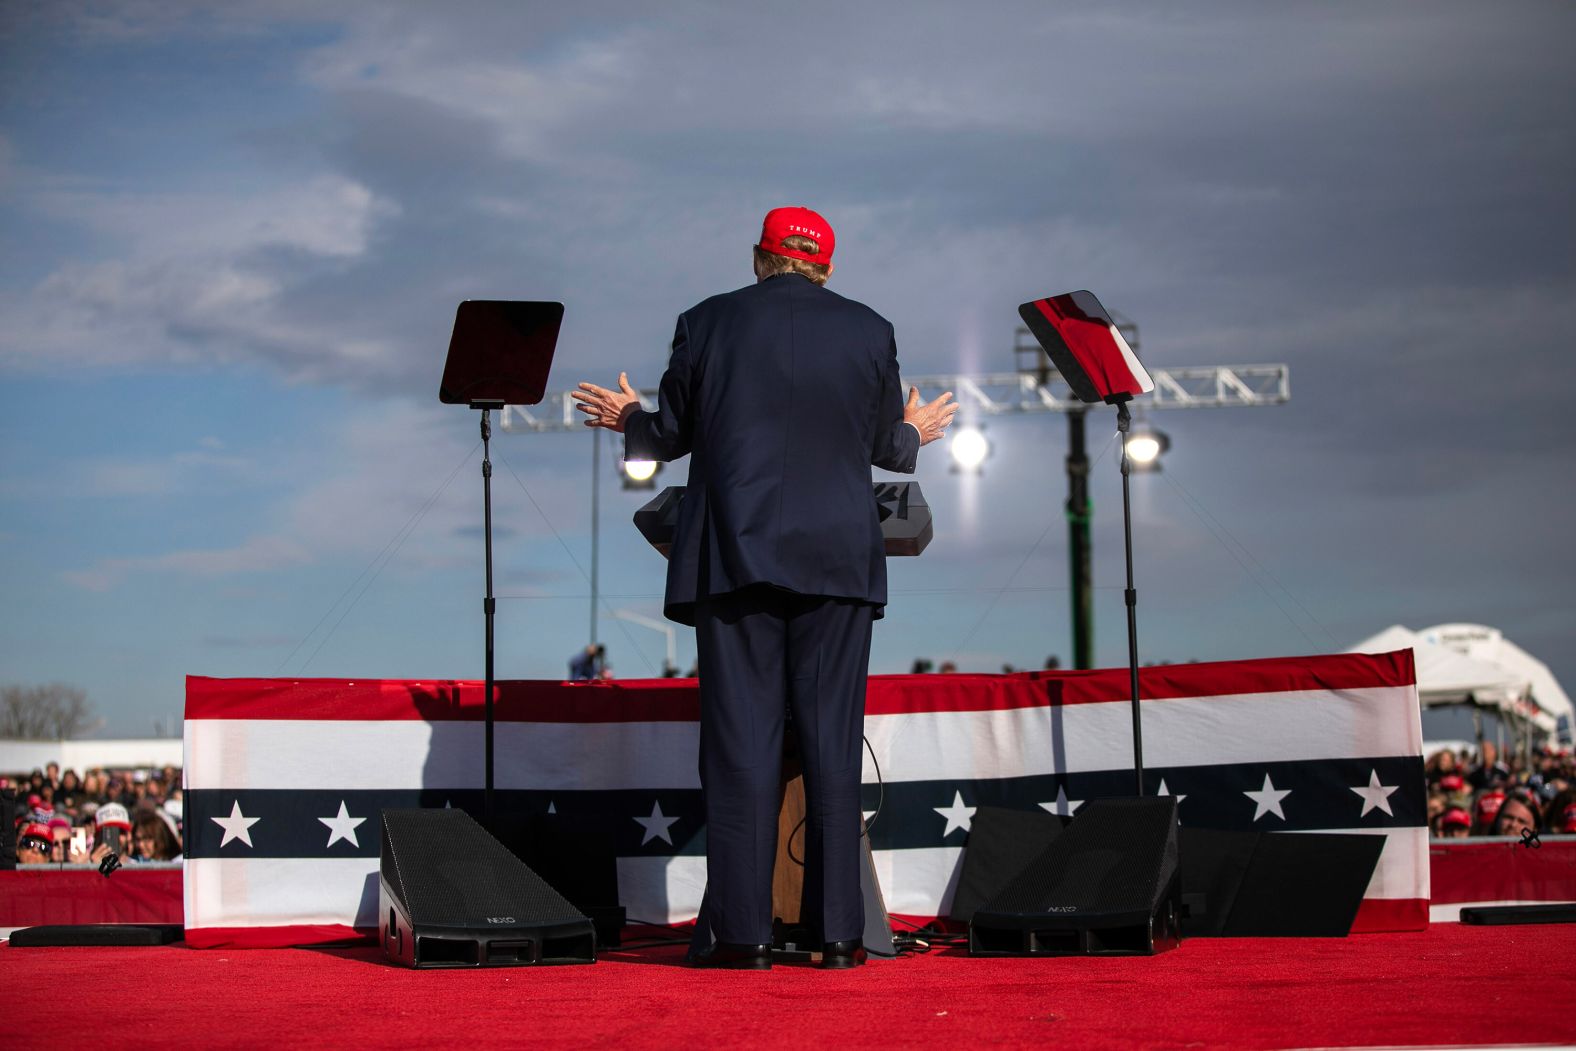 Former President Donald Trump speaks during a rally in Dayton, Ohio, on Saturday, March 16. Trump warned that if he were to lose the 2024 election,<a href="https://www.cnn.com/2024/03/16/politics/trump-bloodbath-auto-industry-election/index.html" target="_blank"> it would be a "bloodbath"</a> for the US auto industry and the country. The remark came as Trump promised a "100% tariff" on cars made outside the US, arguing that domestic auto manufacturing would be protected only if he is elected.